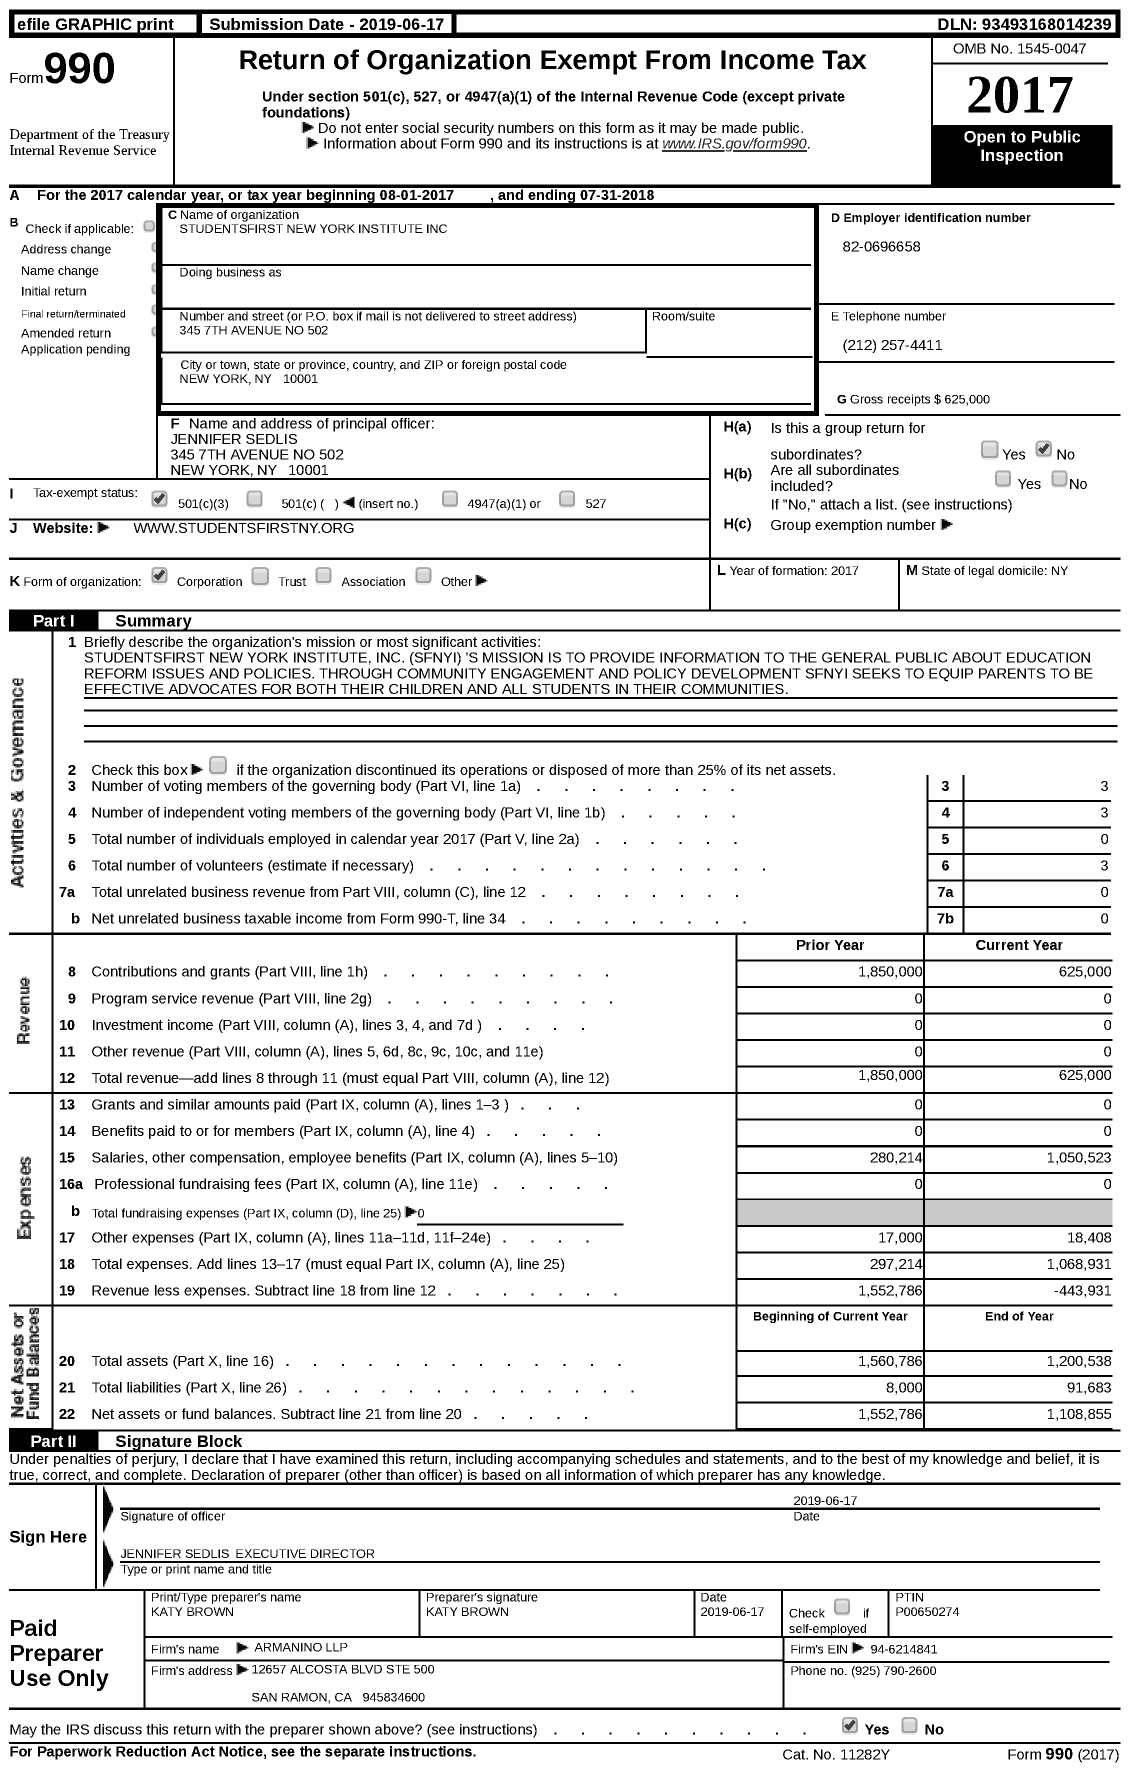 Image of first page of 2017 Form 990 for Studentsfirst New York Institute